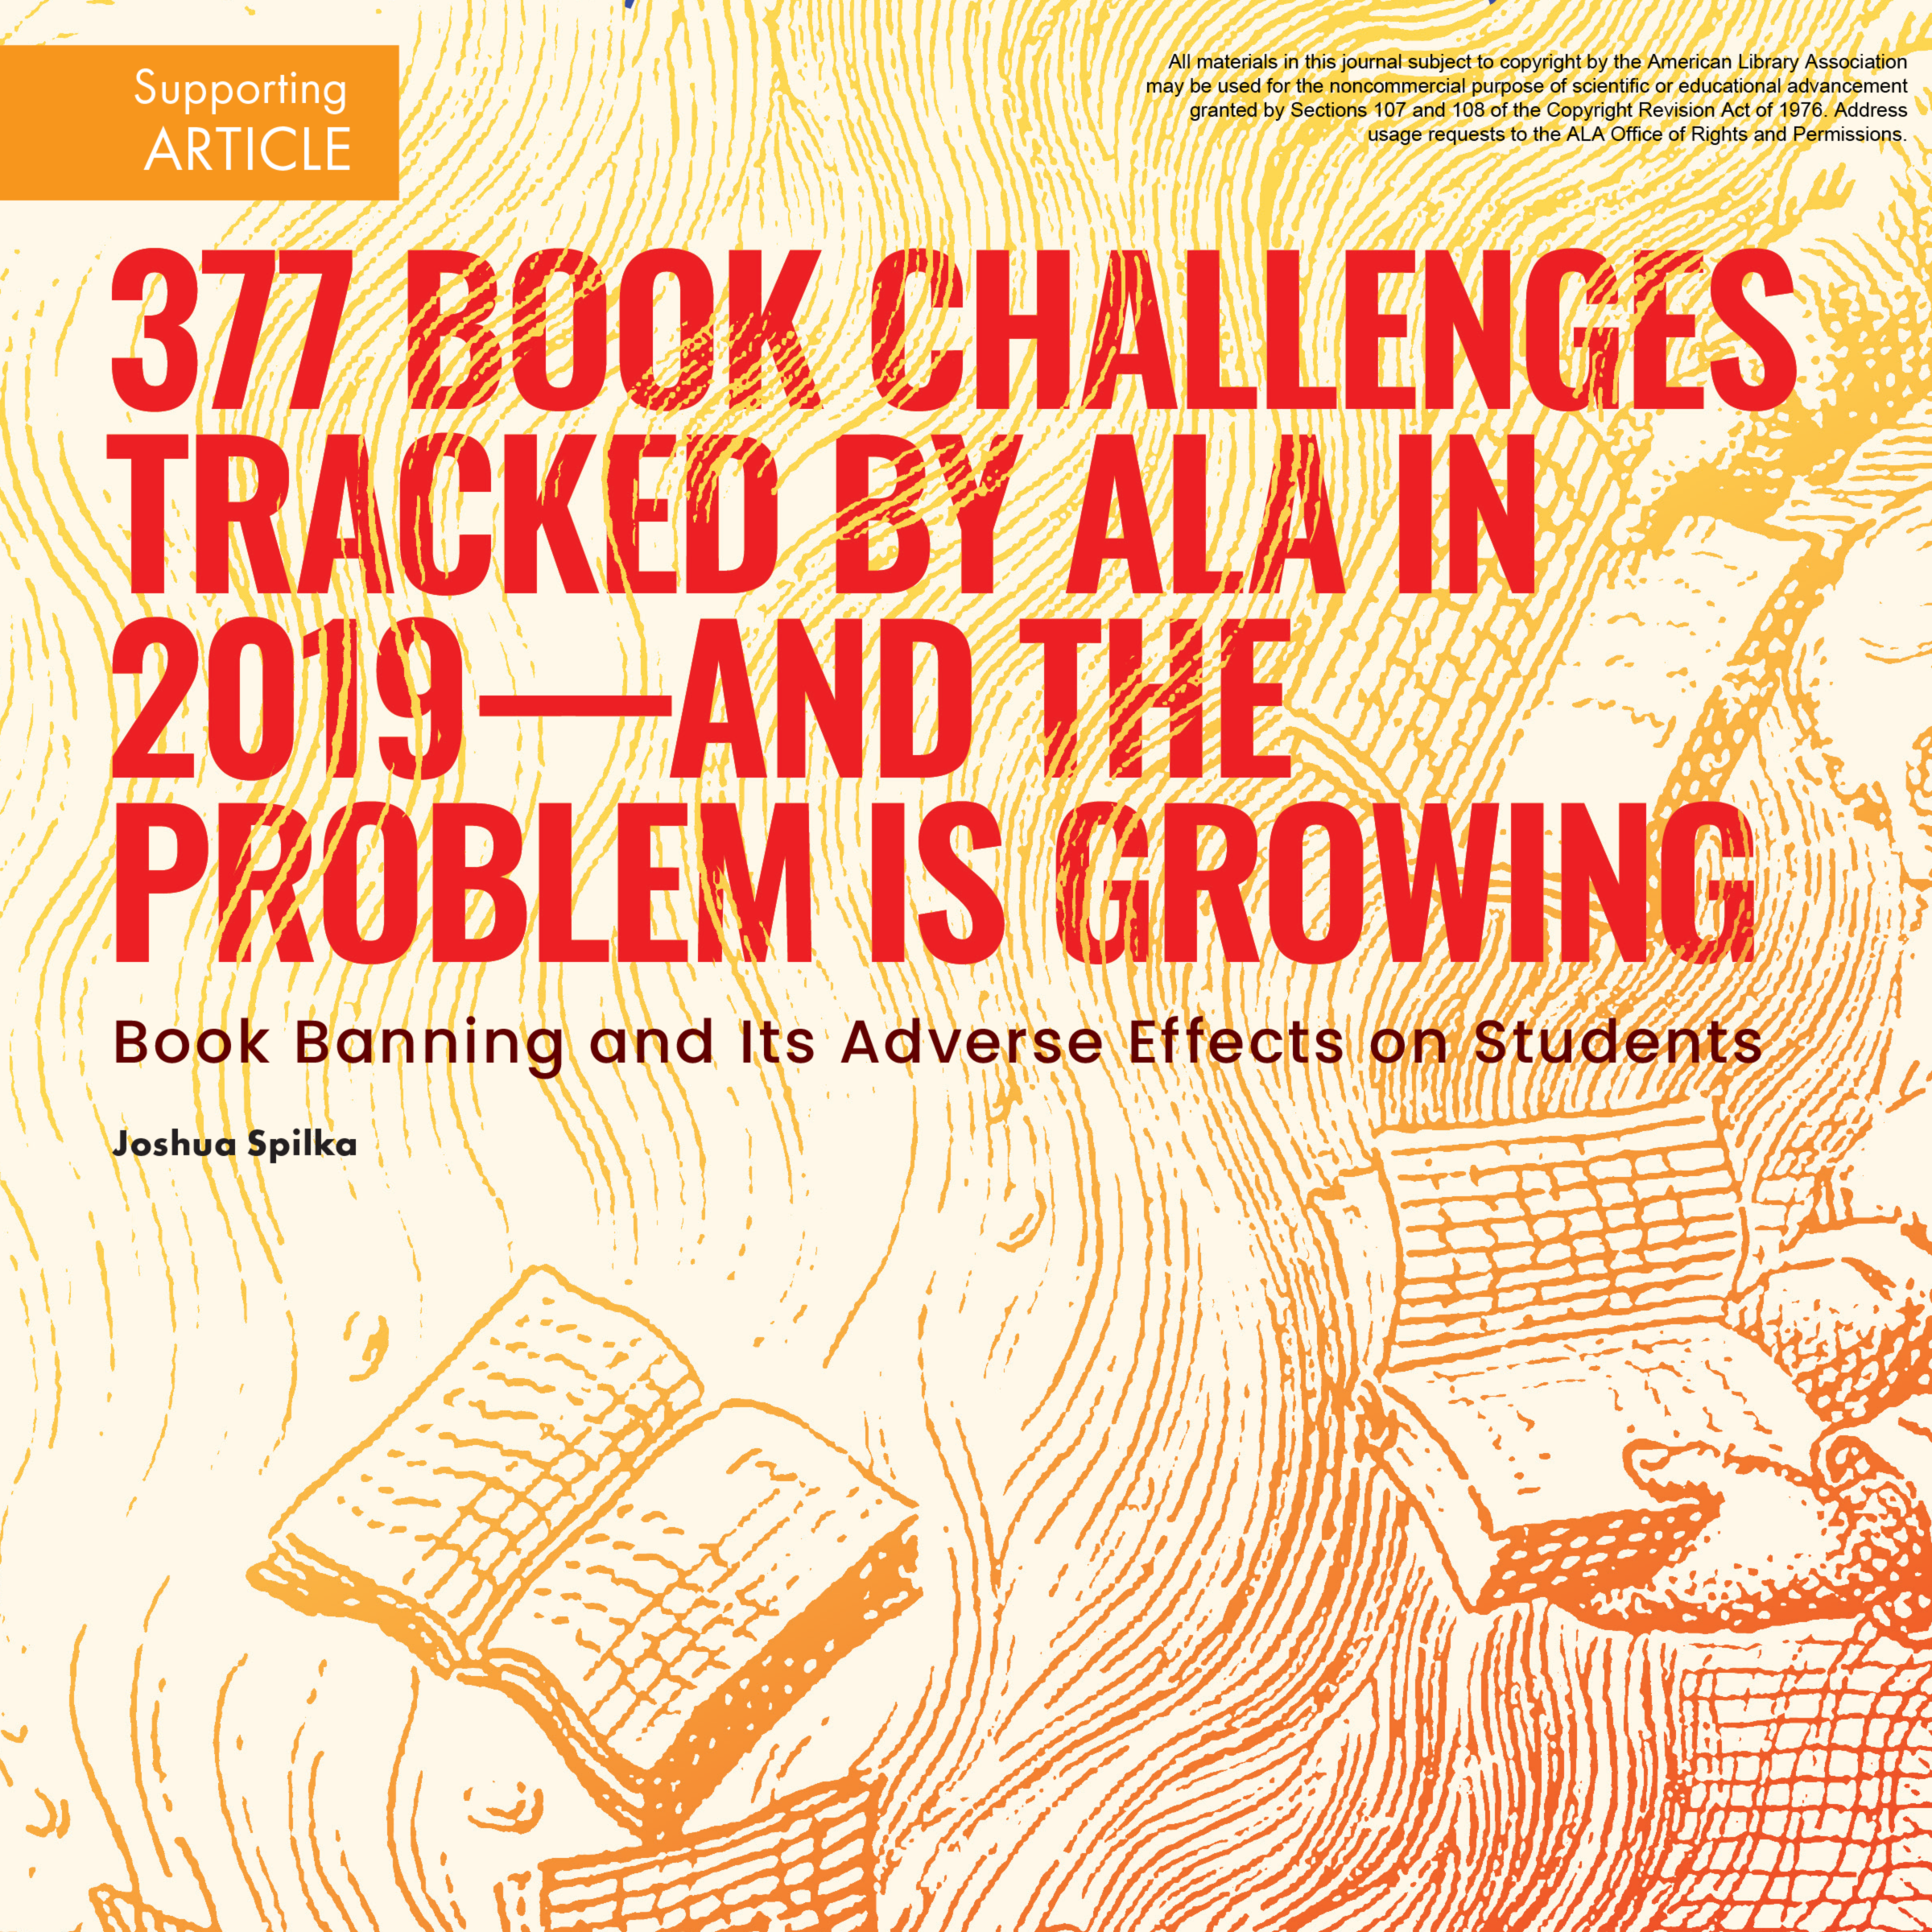 377 Book Challenges Tracked by ALA in 2019—and the Problem is Growing: Book Banning and Its Adverse Effects on Students (Volume 50, No.5, pgs 30-33)